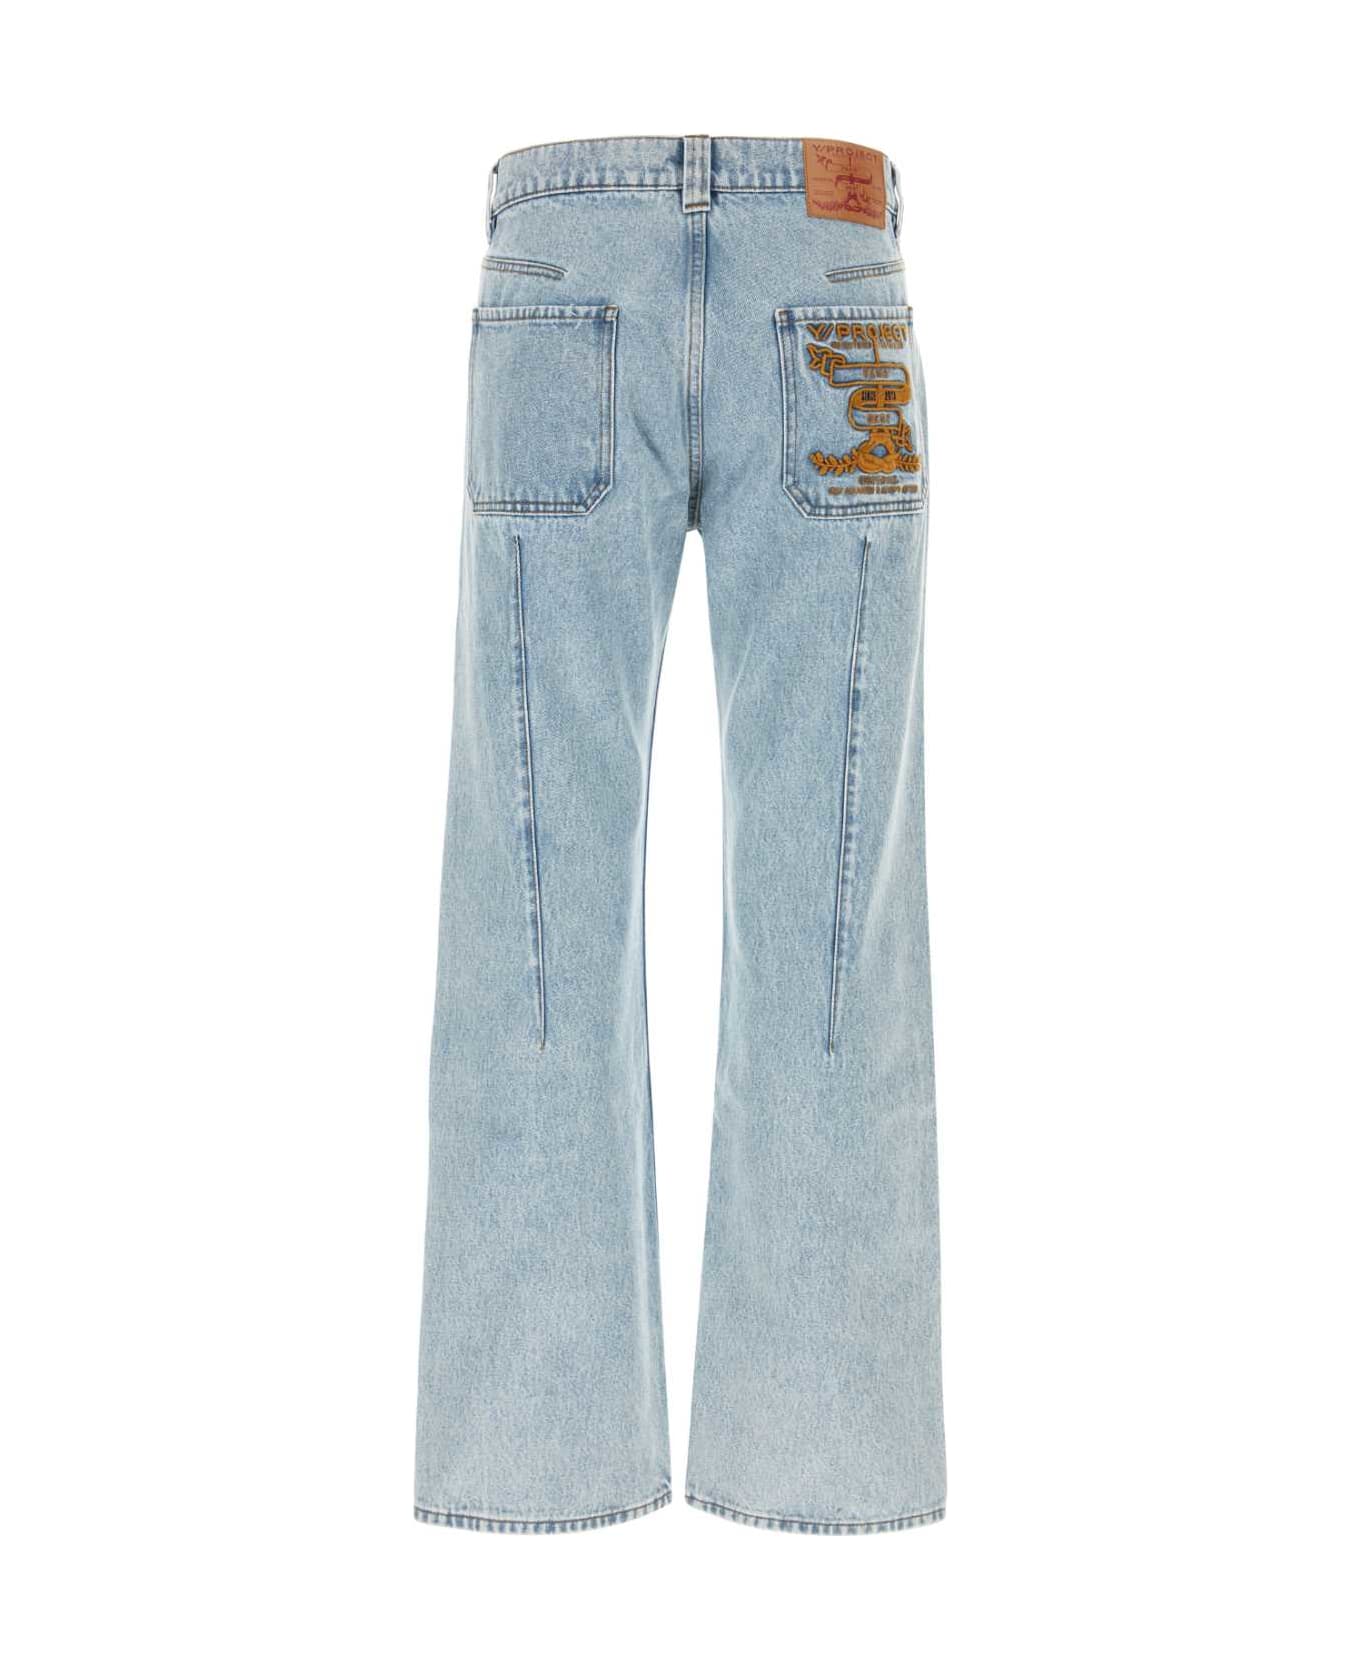 Y/Project Denim Jeans - EVERGREEN ICE BLUE